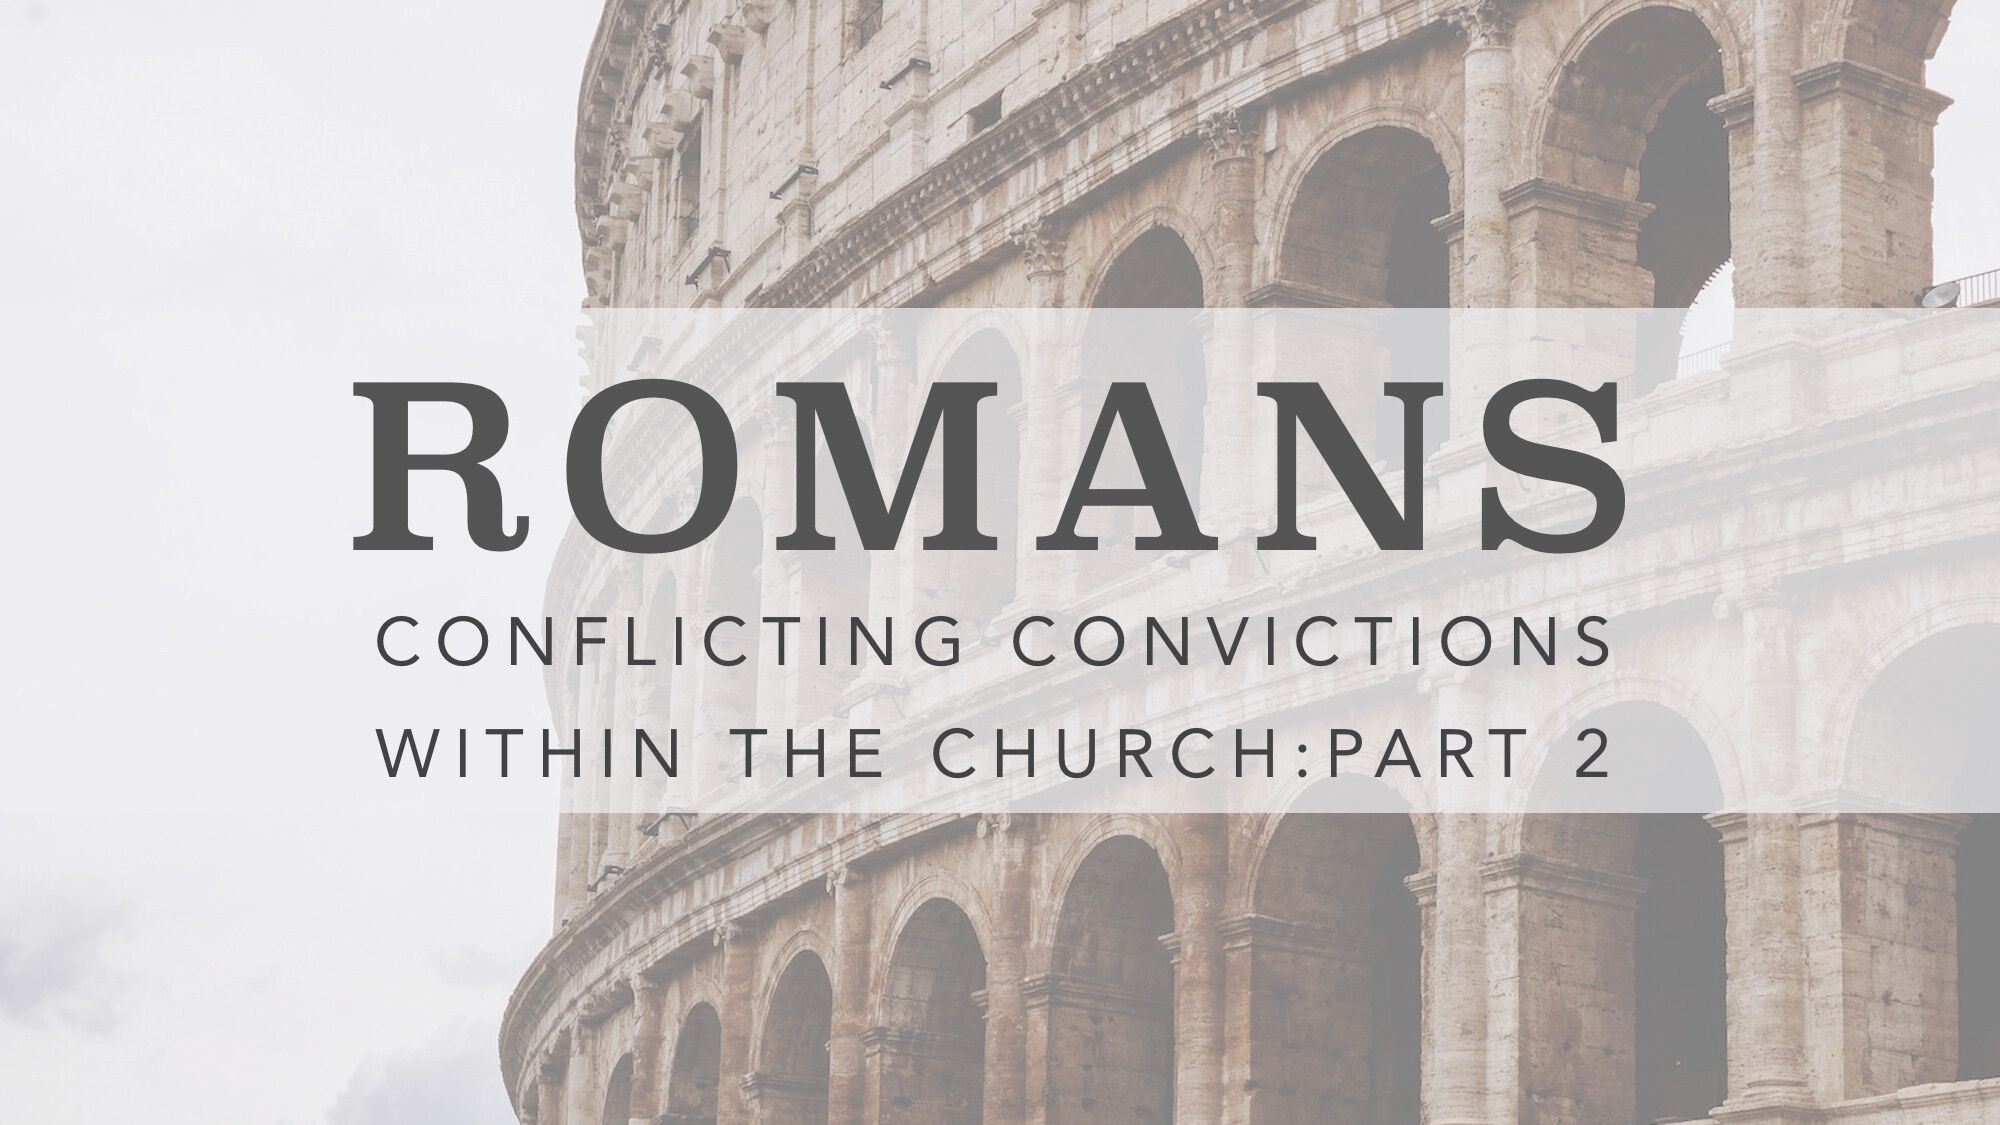 Conflicting Convictions Within the Church, Part 2